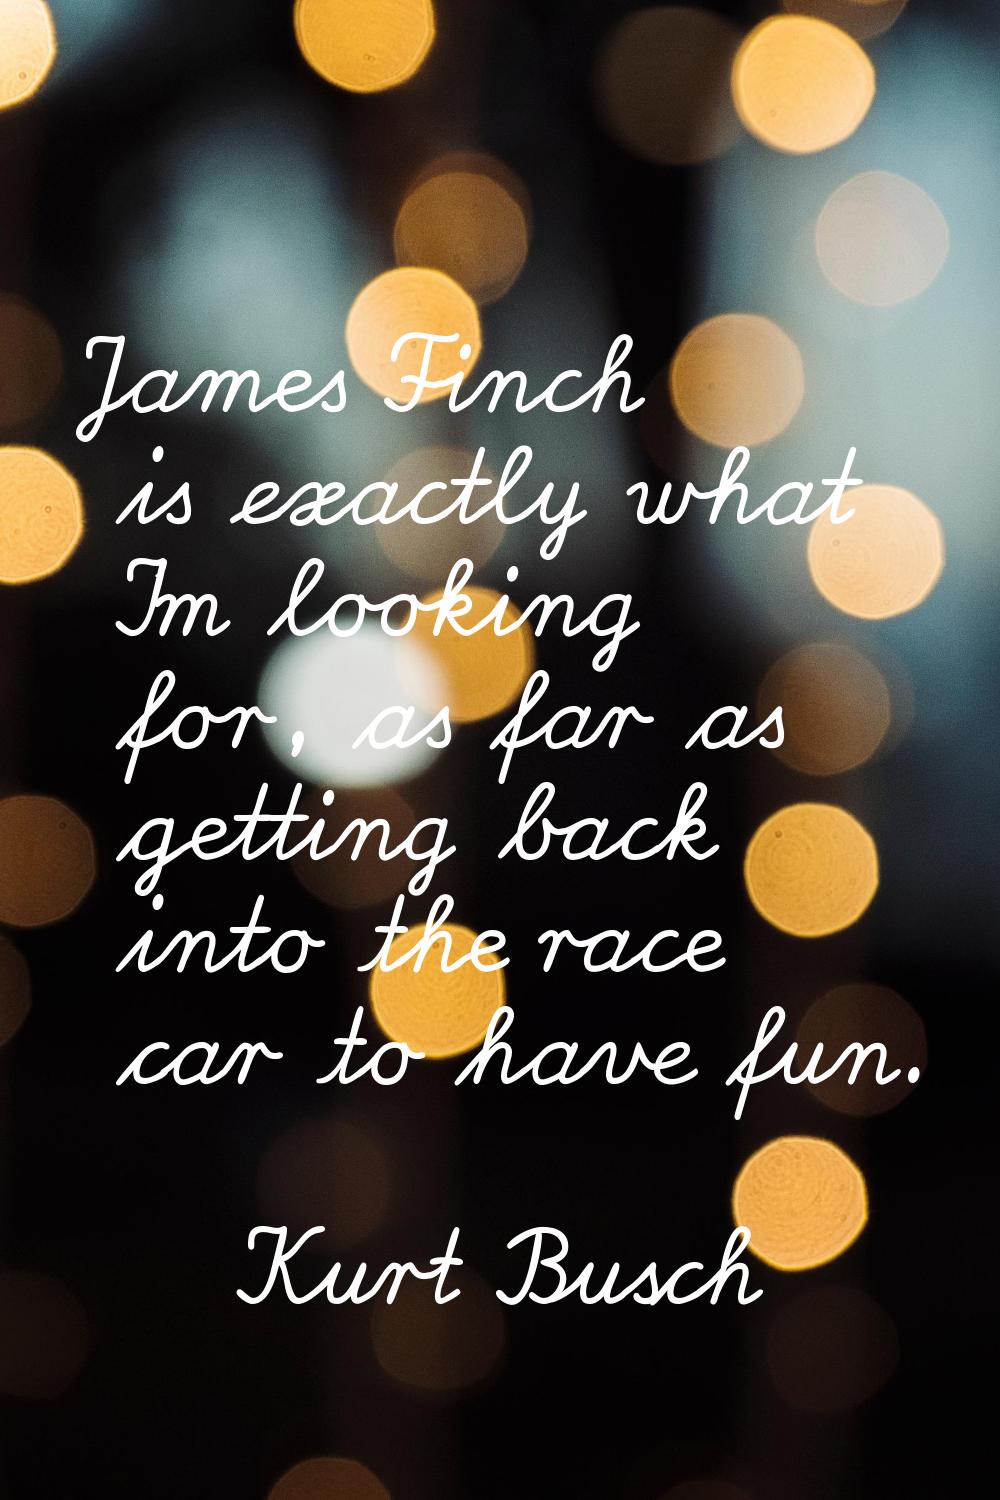 James Finch is exactly what I'm looking for, as far as getting back into the race car to have fun.